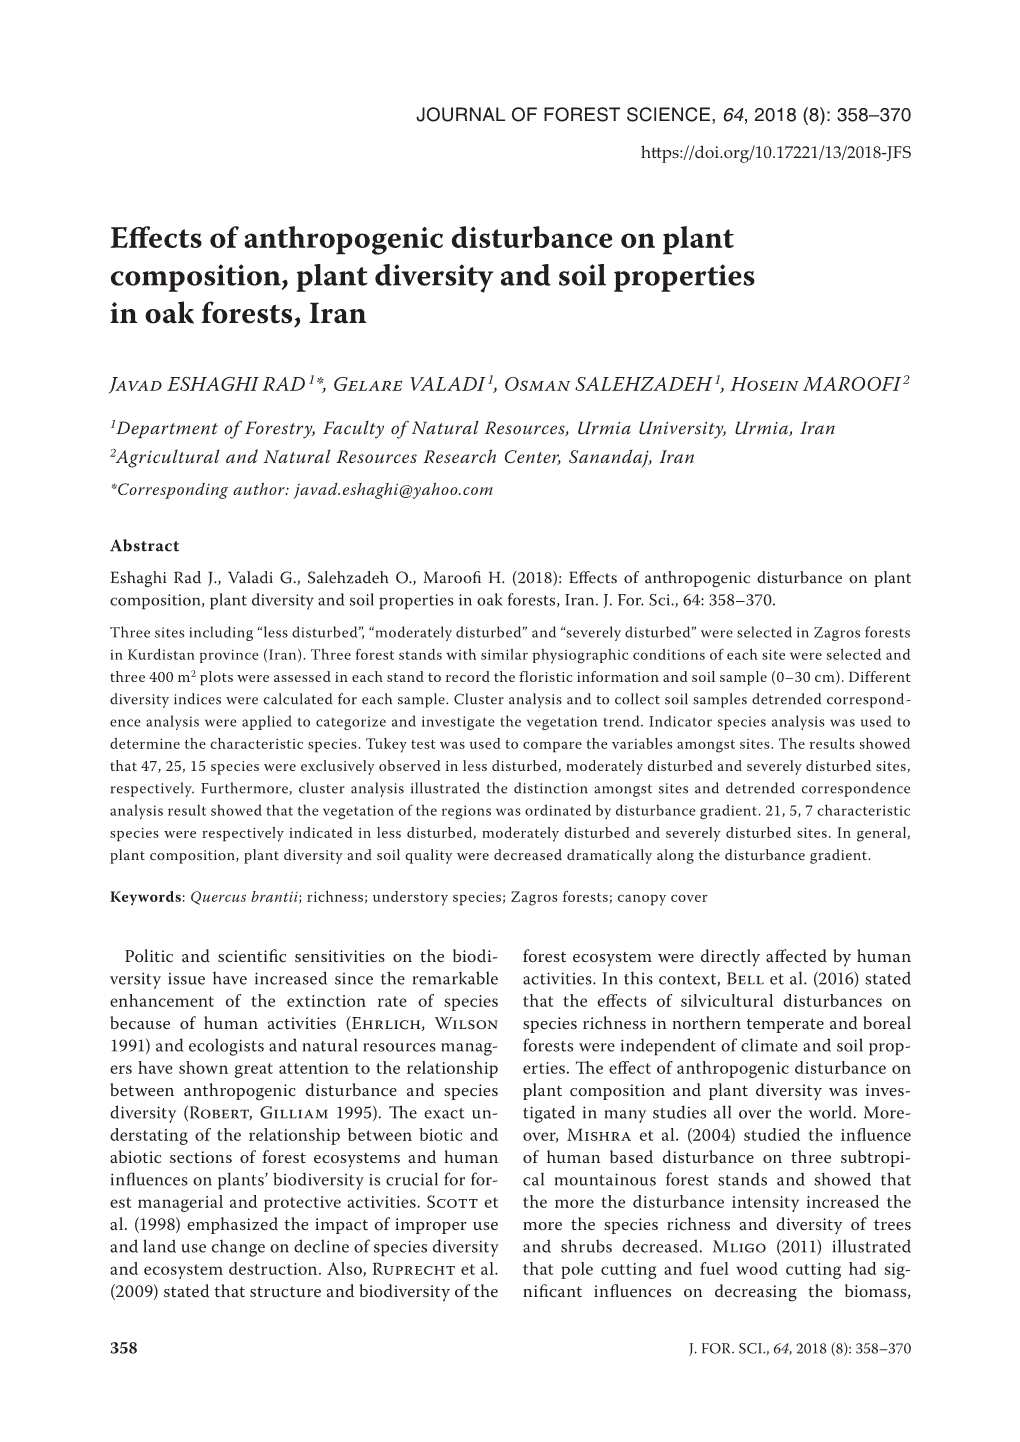 Effects of Anthropogenic Disturbance on Plant Composition, Plant Diversity and Soil Properties in Oak Forests, Iran